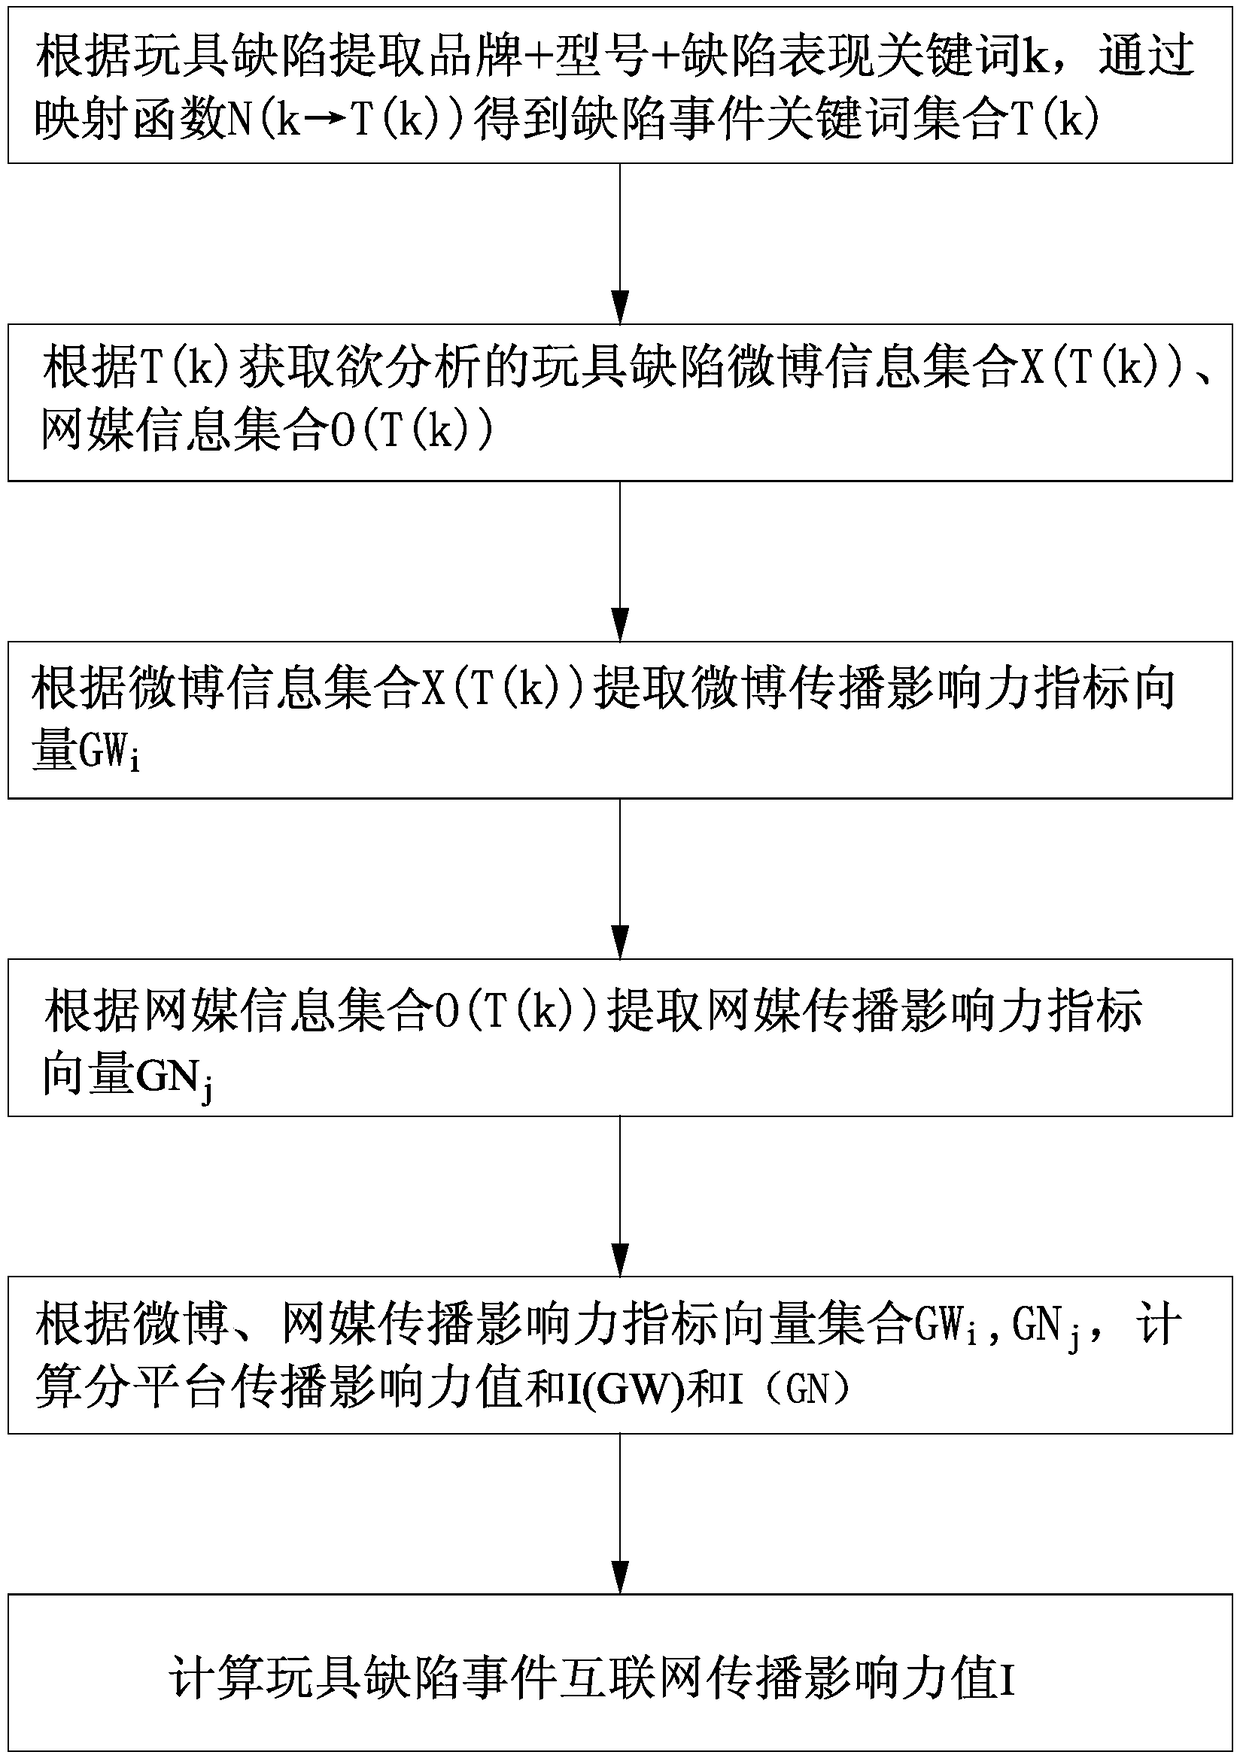 Evaluation method of internet dissemination influences of toy defect event